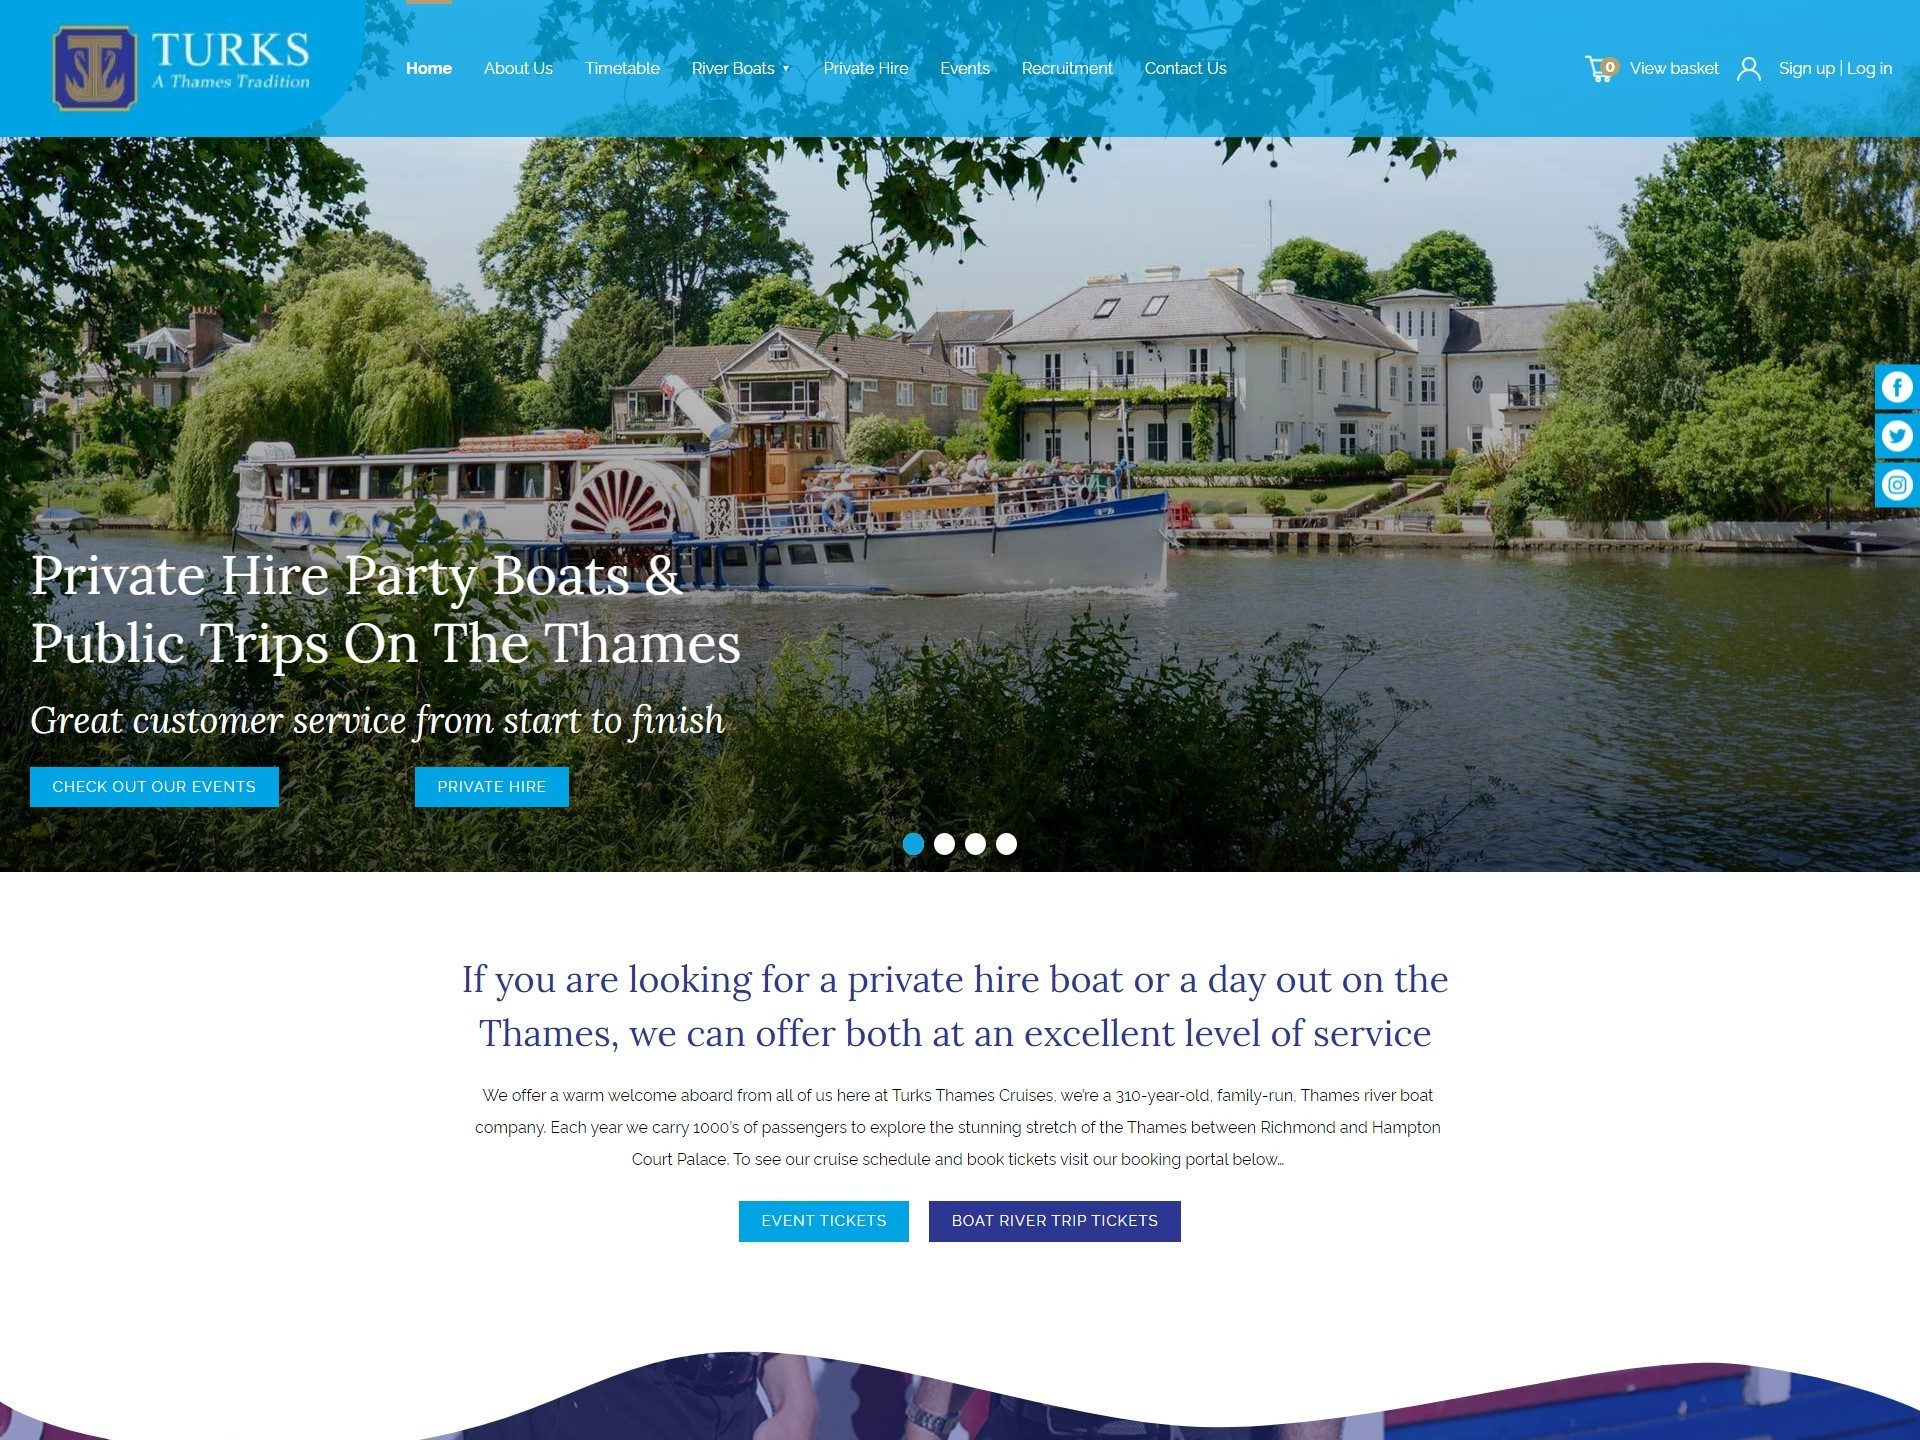 The new Turks website for private hire boats, designed by it'seeze, displayed on desktop